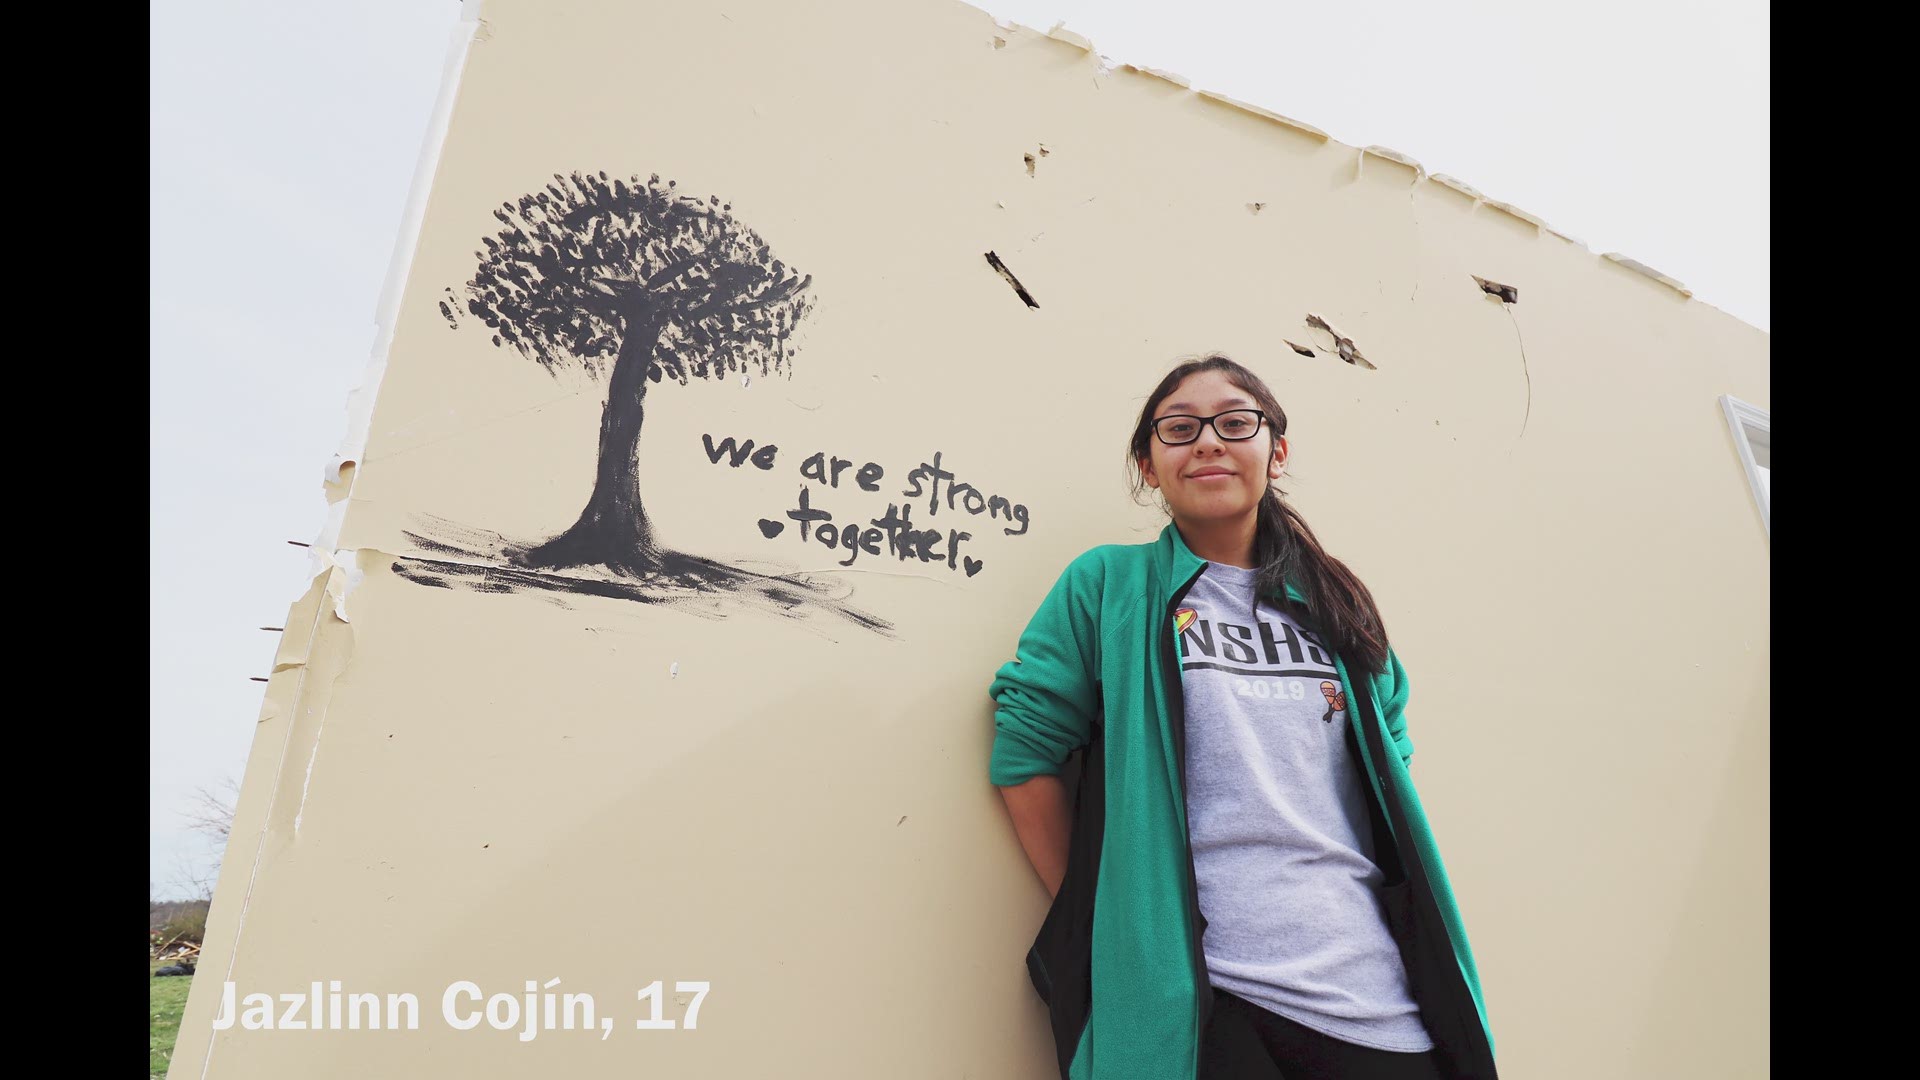 Survivor Jazlinn Cojin recounts how her father pulled her from rubble, and why she was inspired to create a mural on her old bedroom wall.